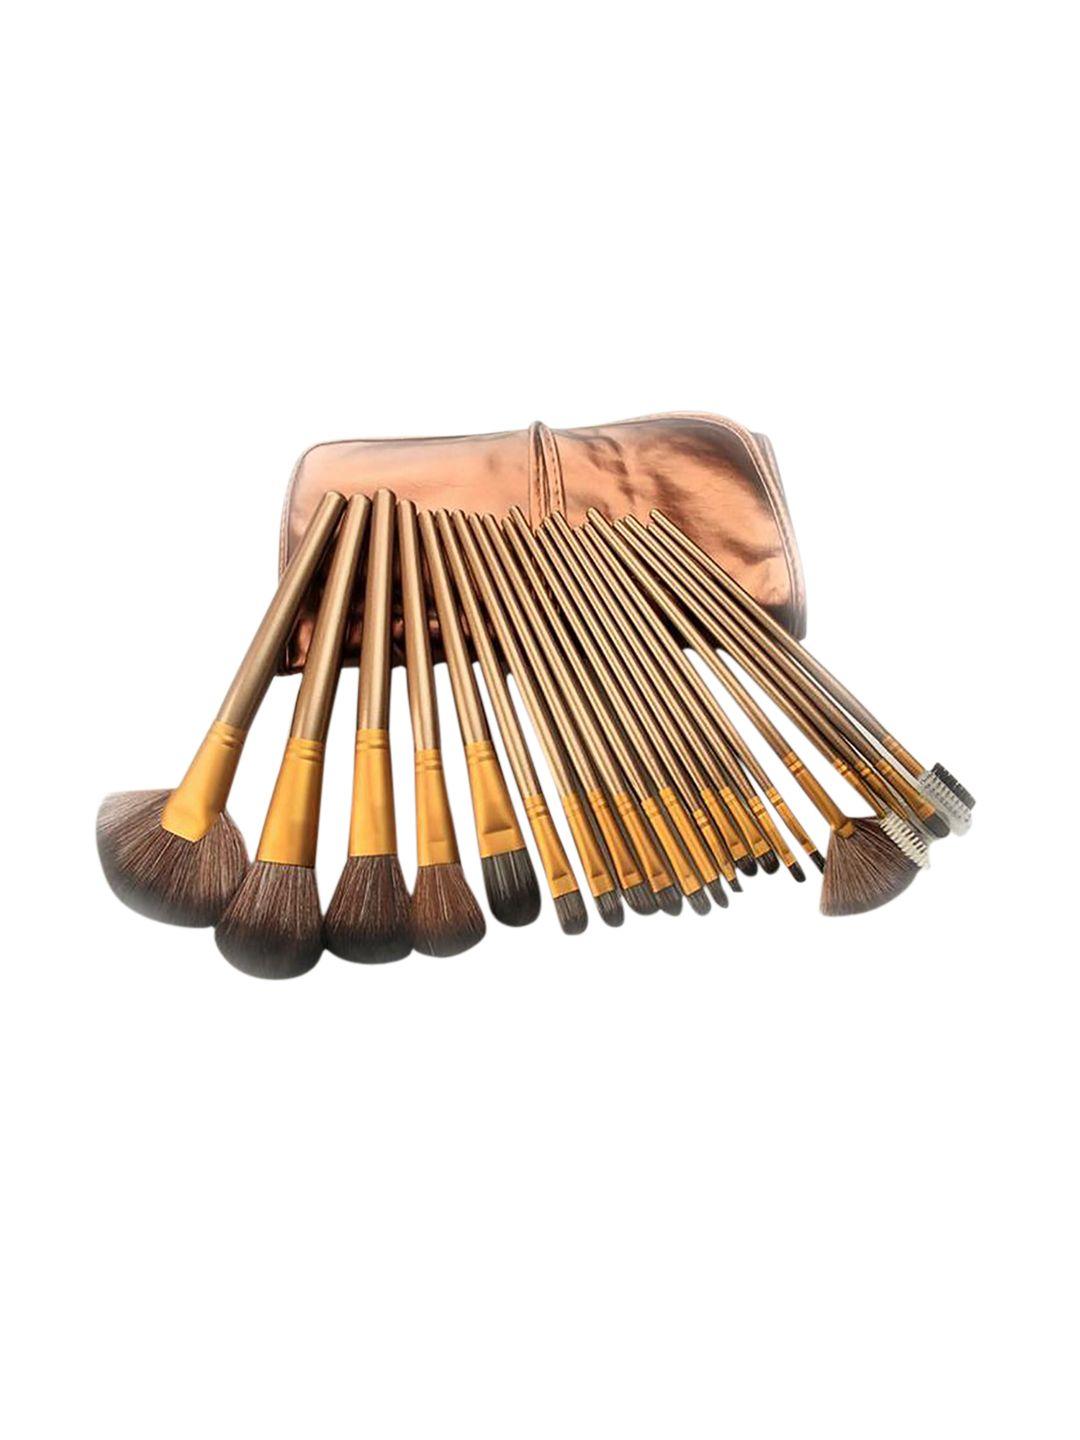 ronzille set of 24 gold-toned makeup brushes